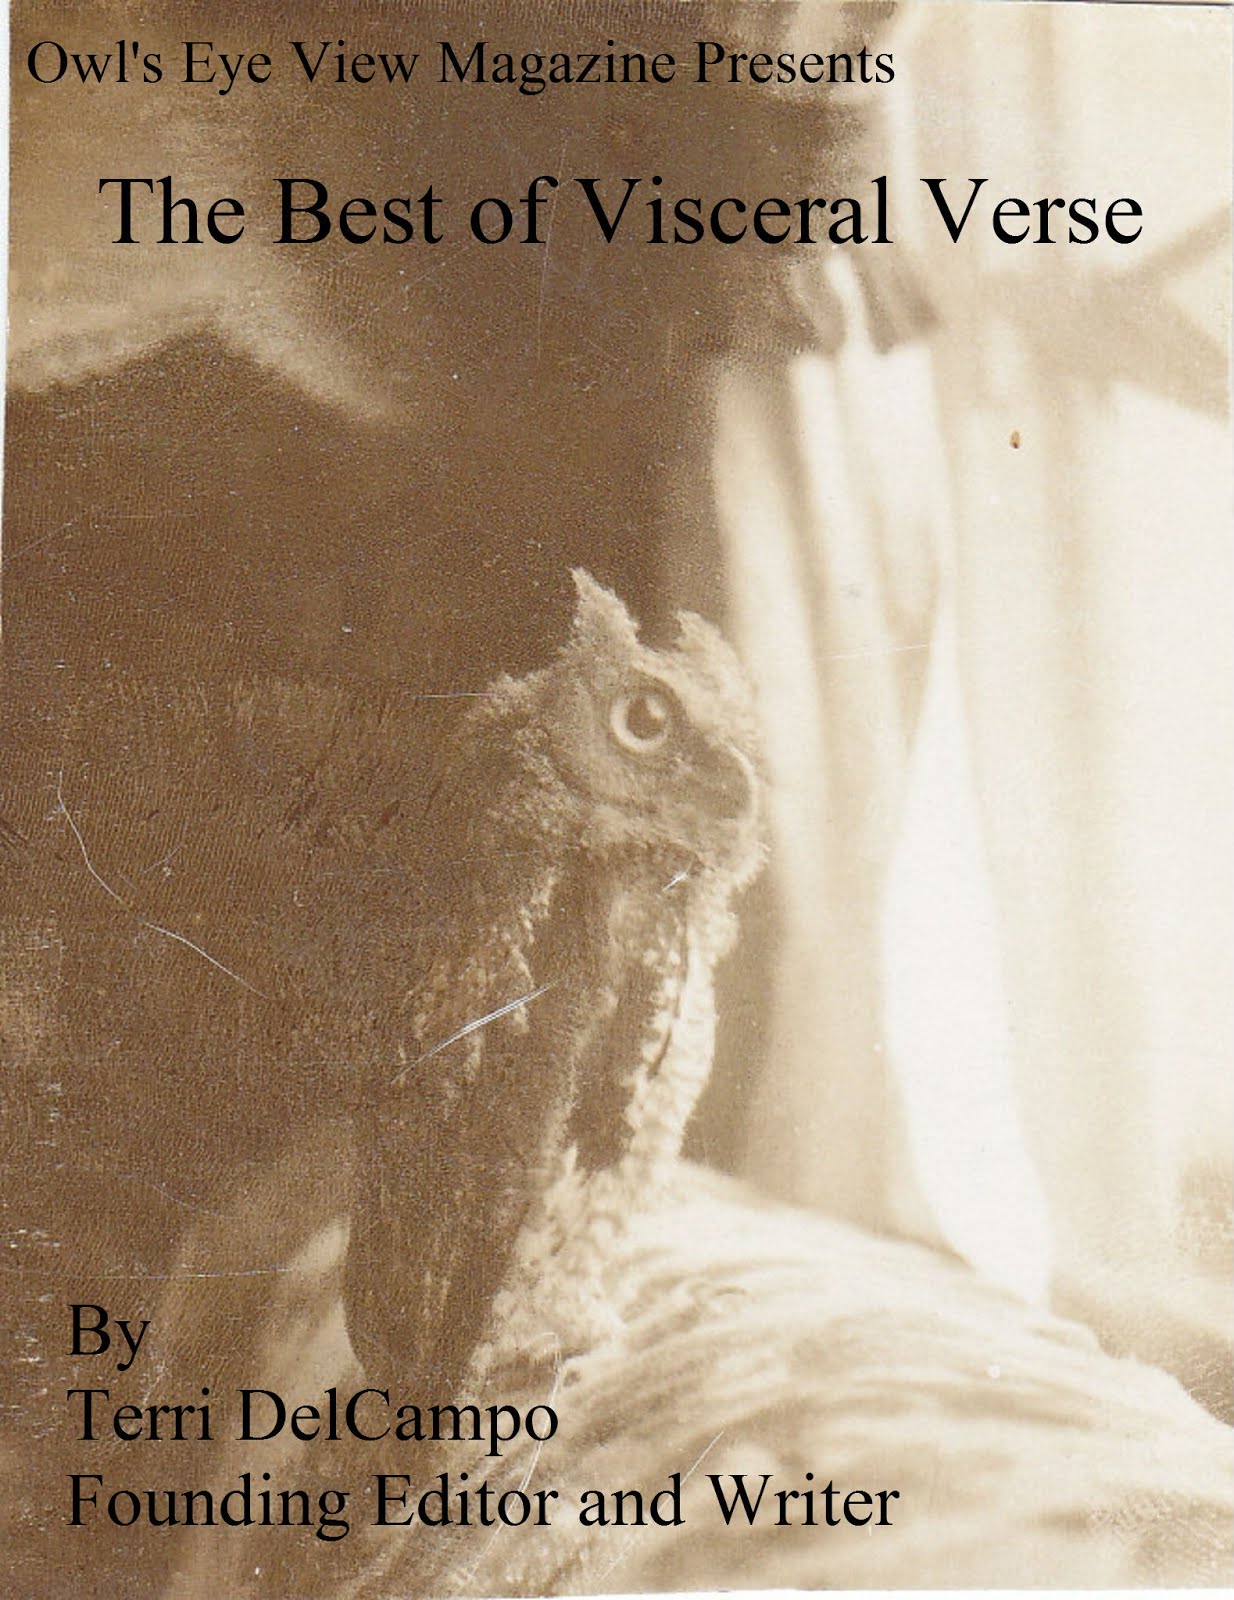 OEV MAGAZINE PRESENTS THE BEST OF VISCERAL VERSE